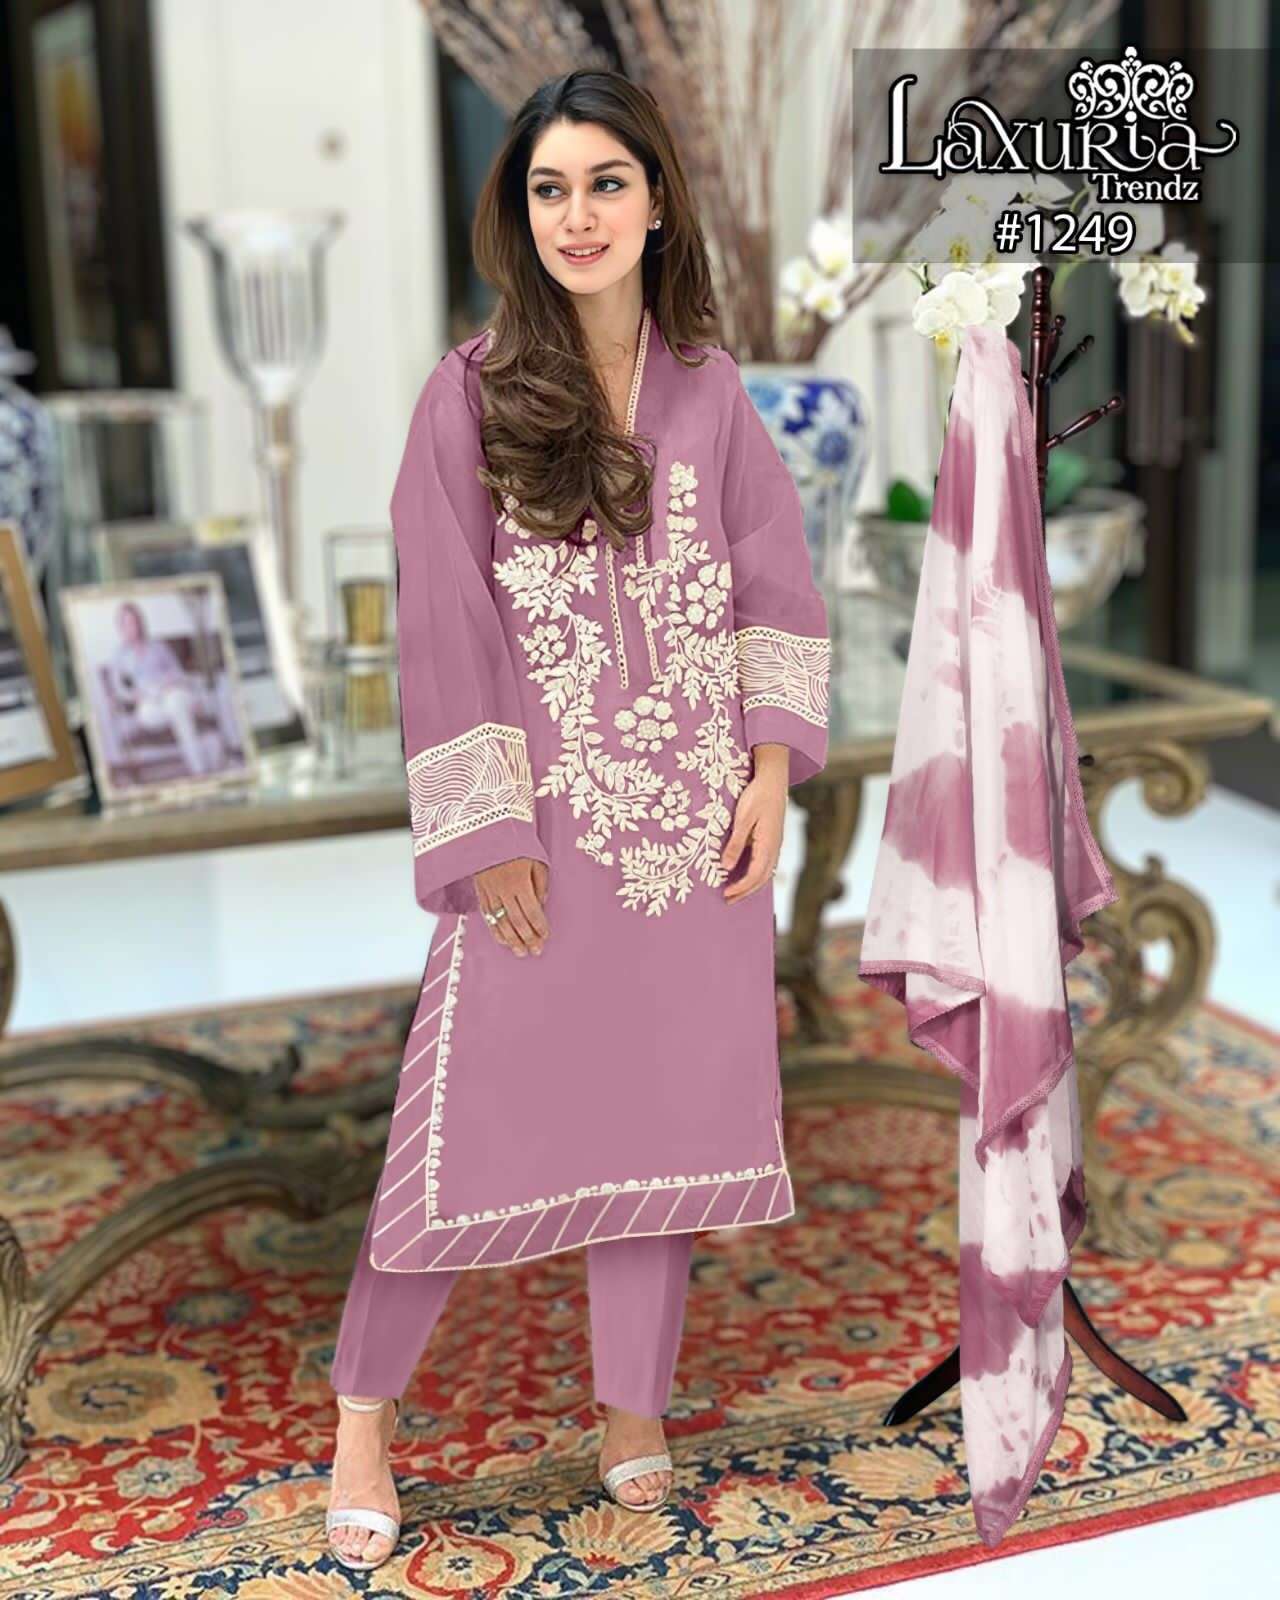 laxuria trendz now launching new design with new colour kurti with pant and duppta laxuria trendz design number 1249 pakistani readymade dresses collection